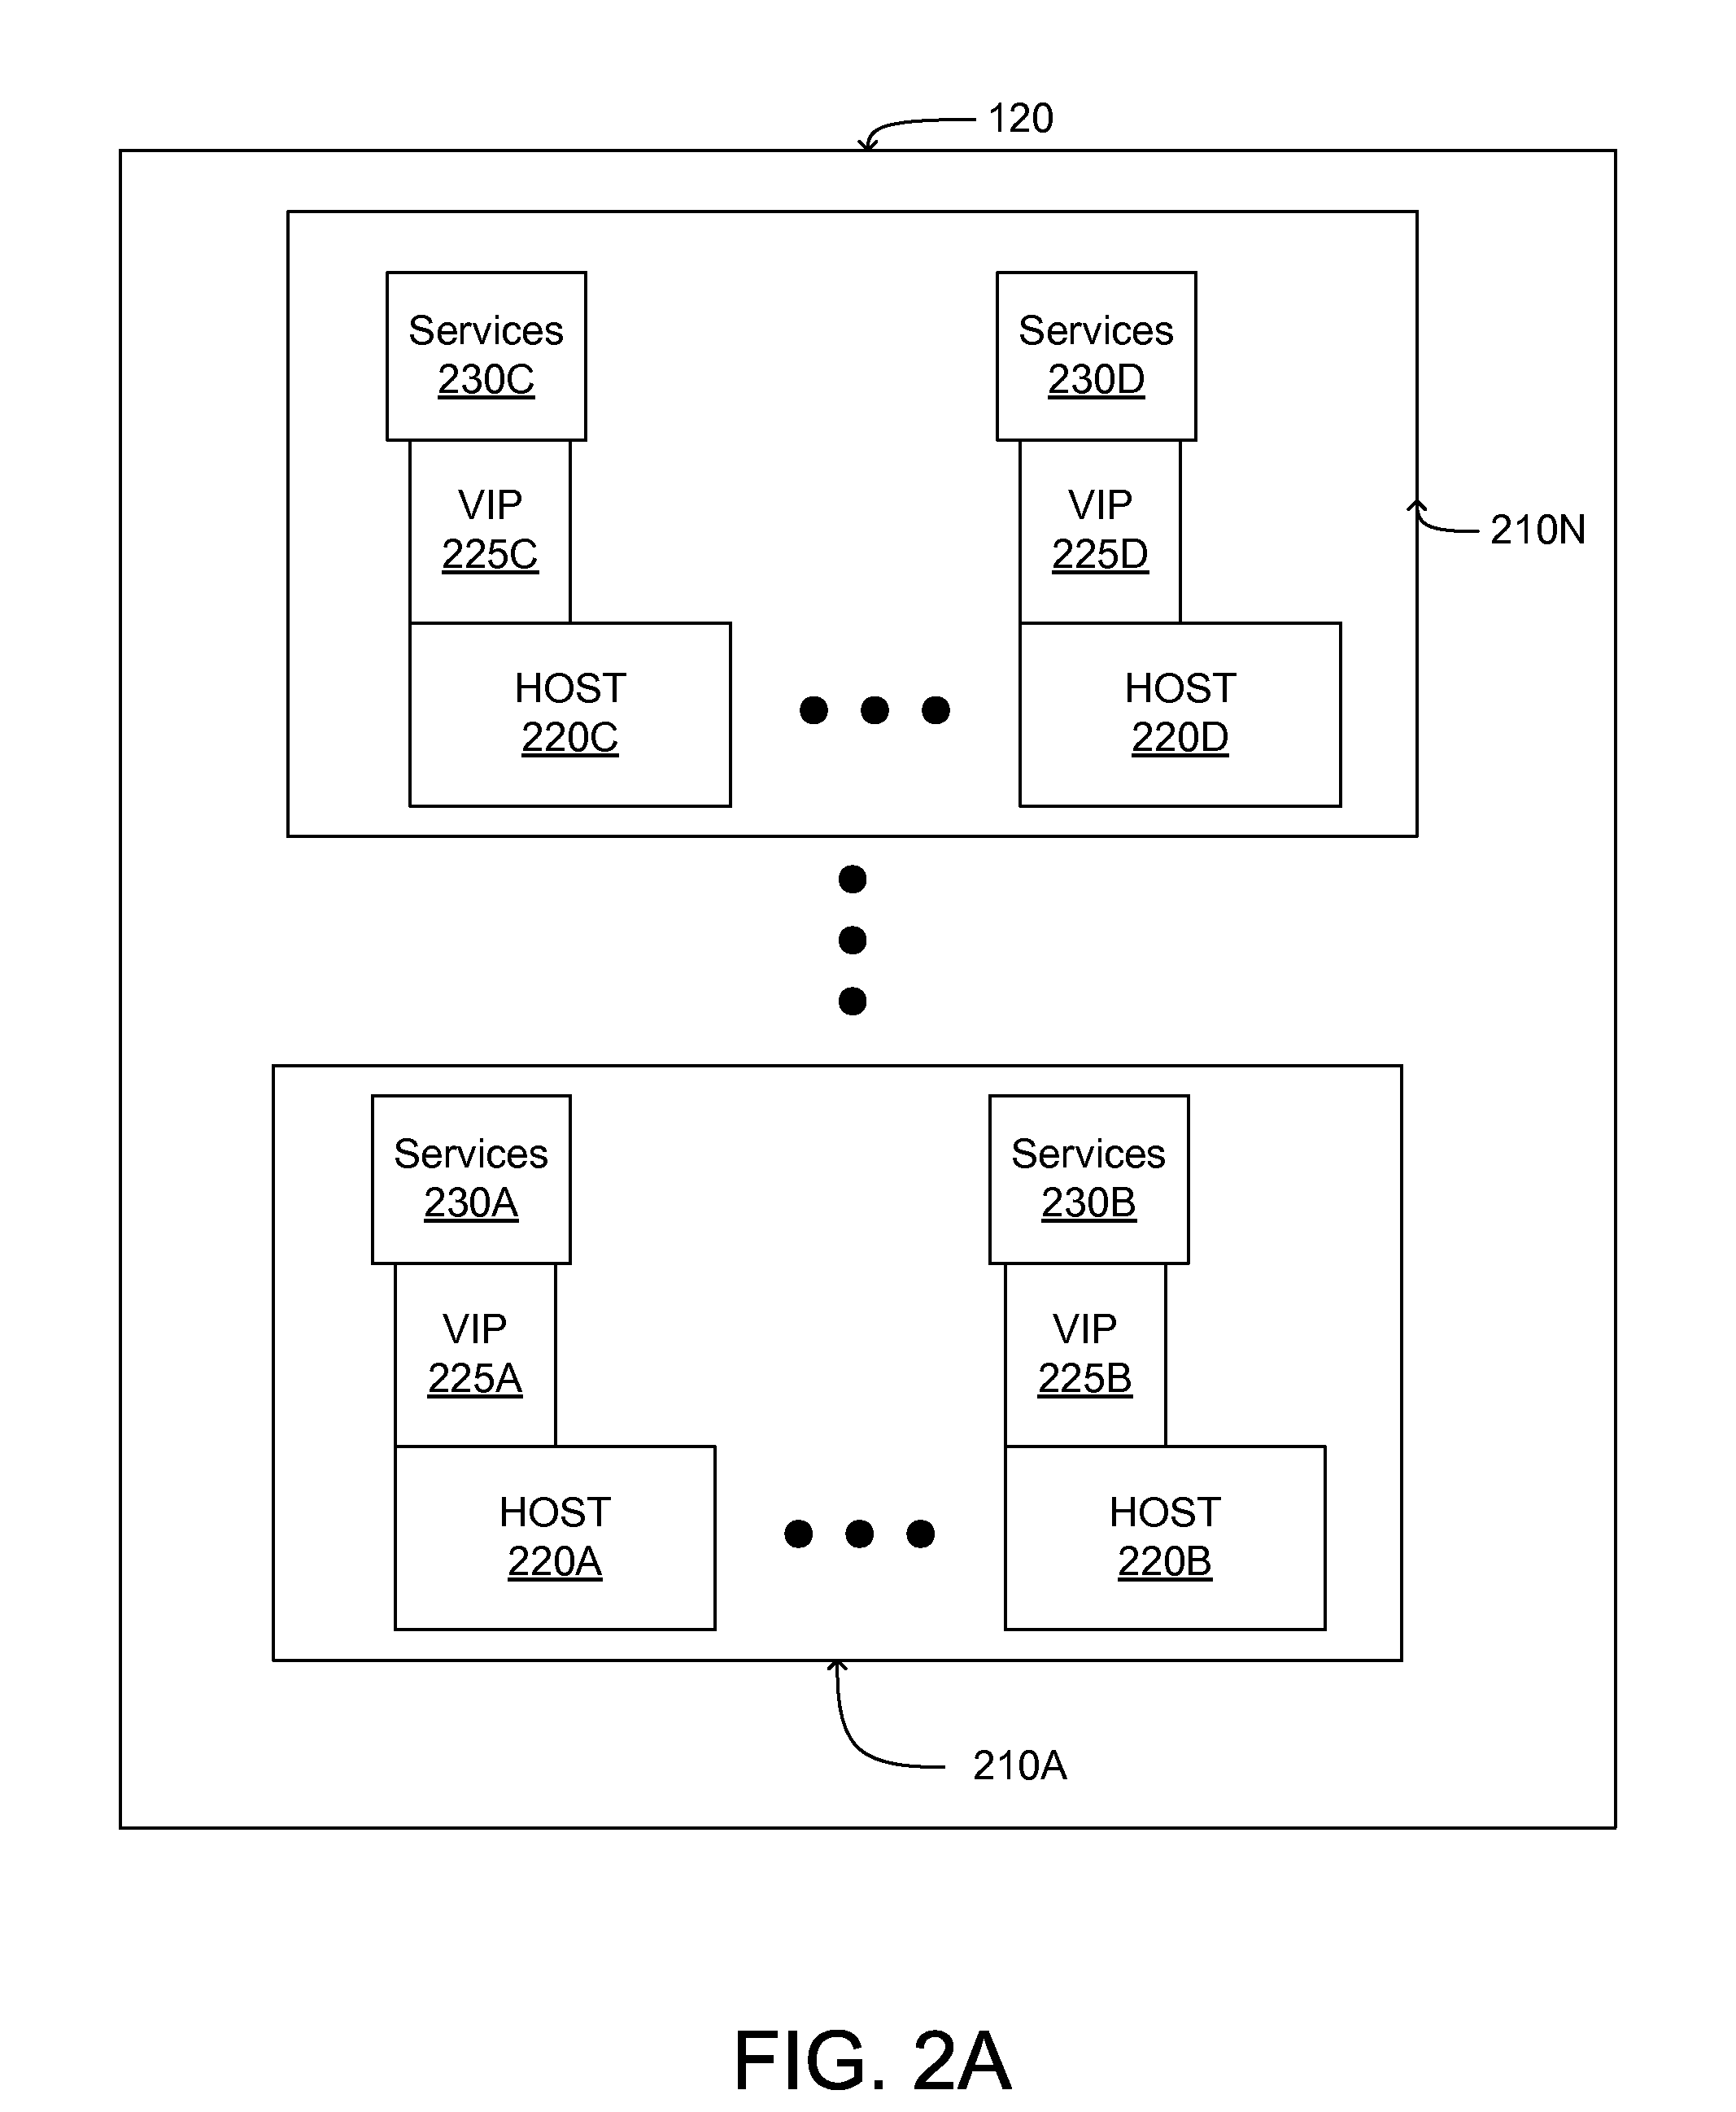 Distributed data cache for on-demand application acceleration